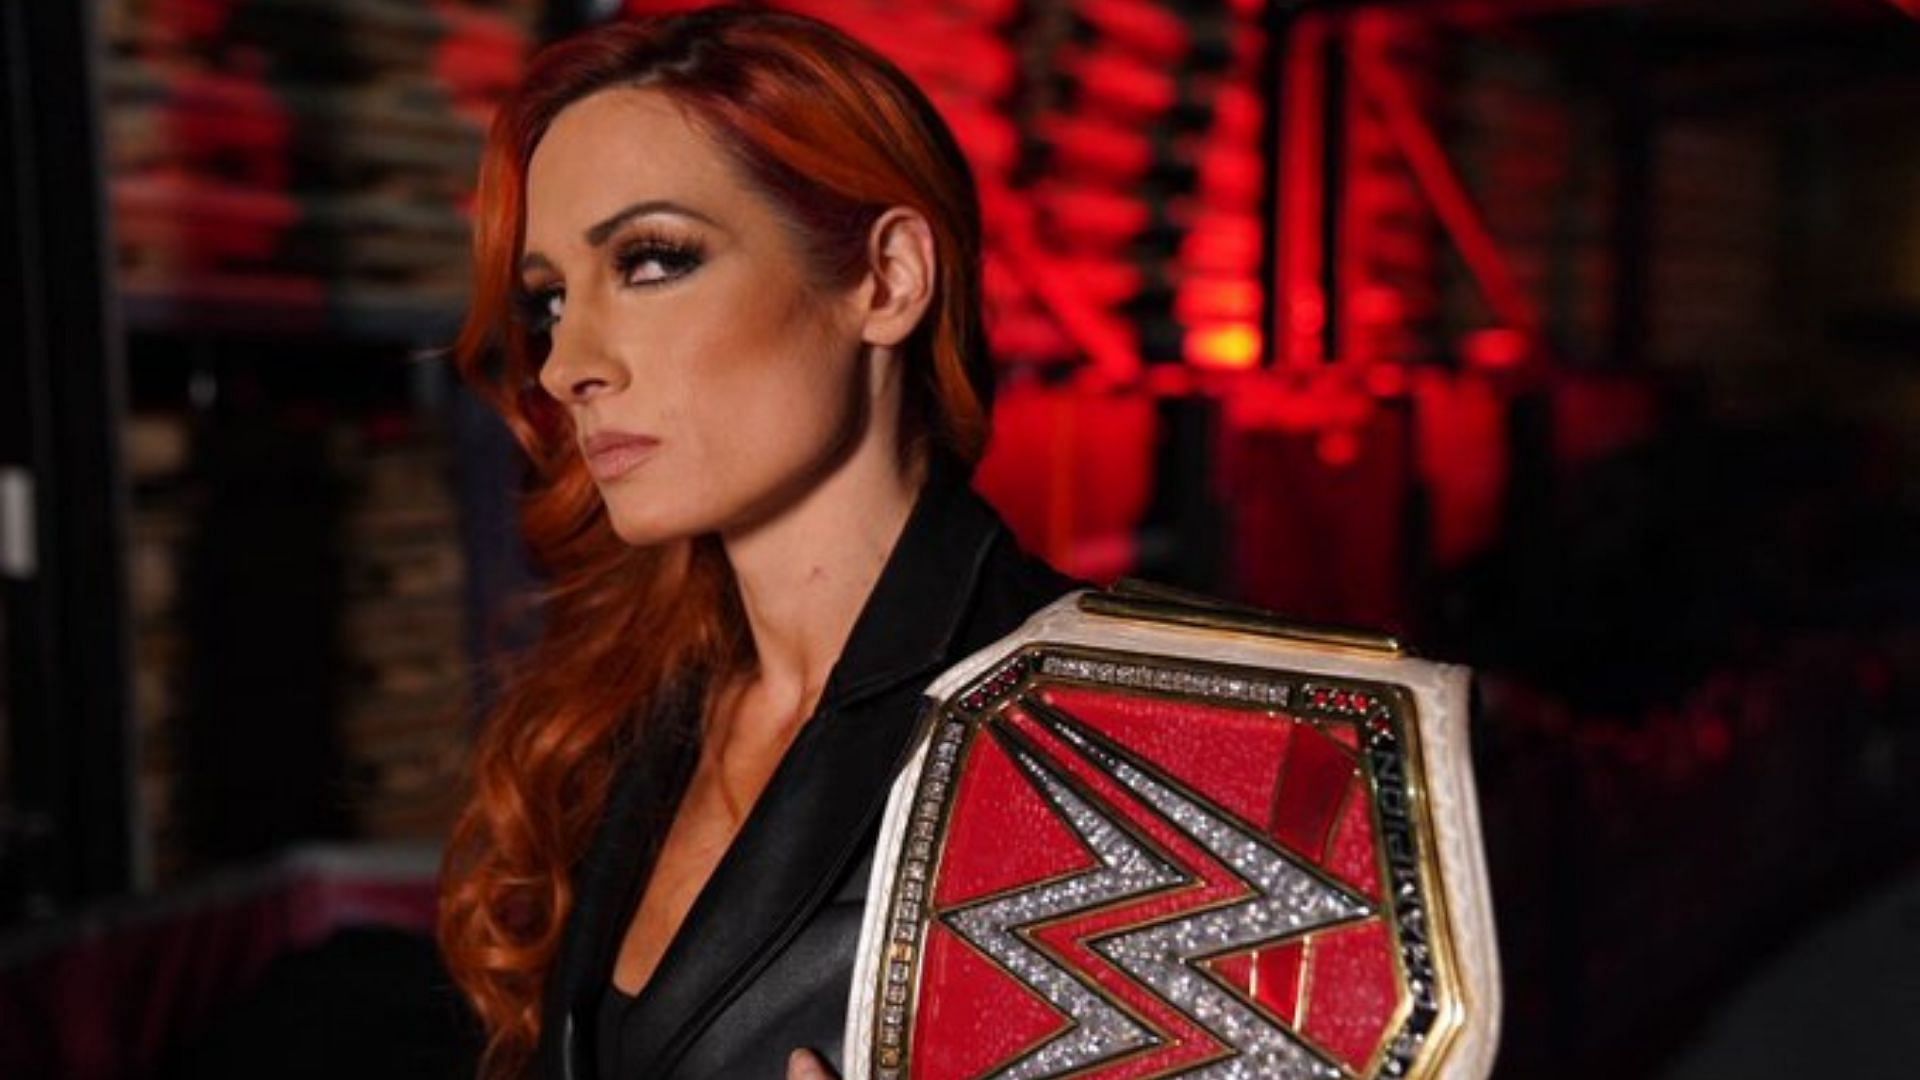 Becky Lynch defended her title in less than 24 hours after Day 1